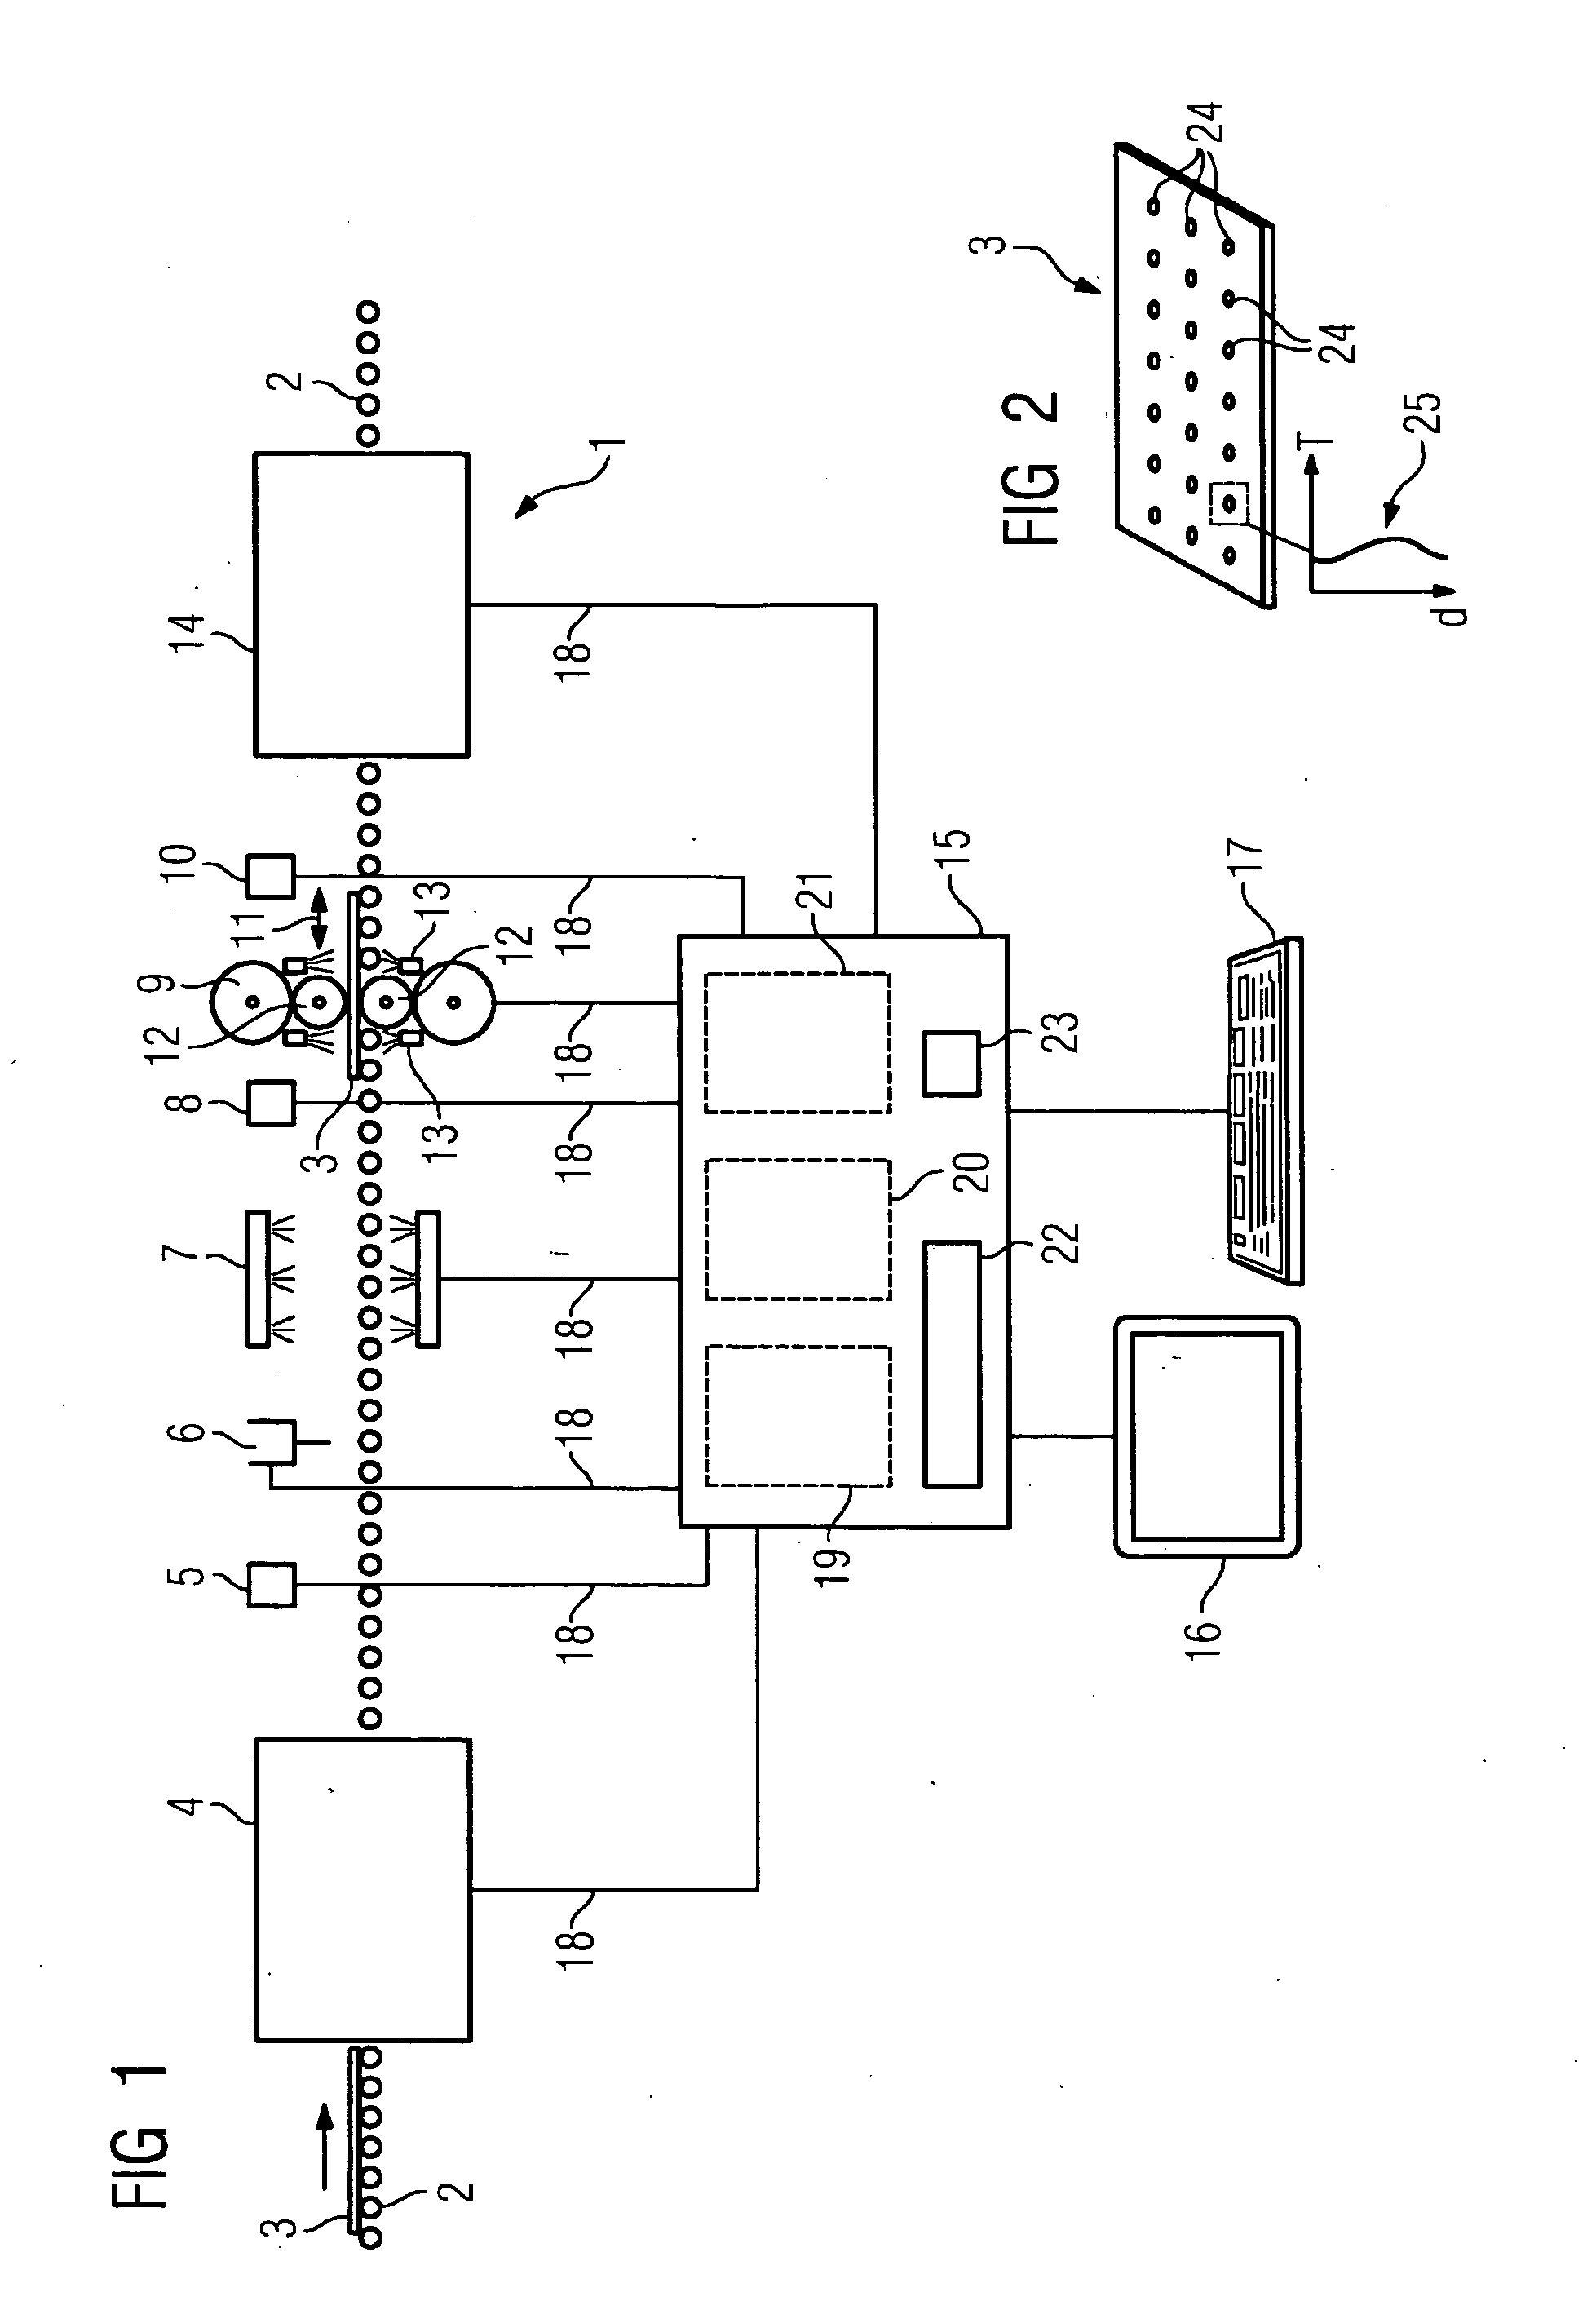 Method for monitoring the physical state of a hot-rolled sheet or hot-rolled strip while controlling a plate rolling train for working a hot-rolled sheet or hot-rolled strip